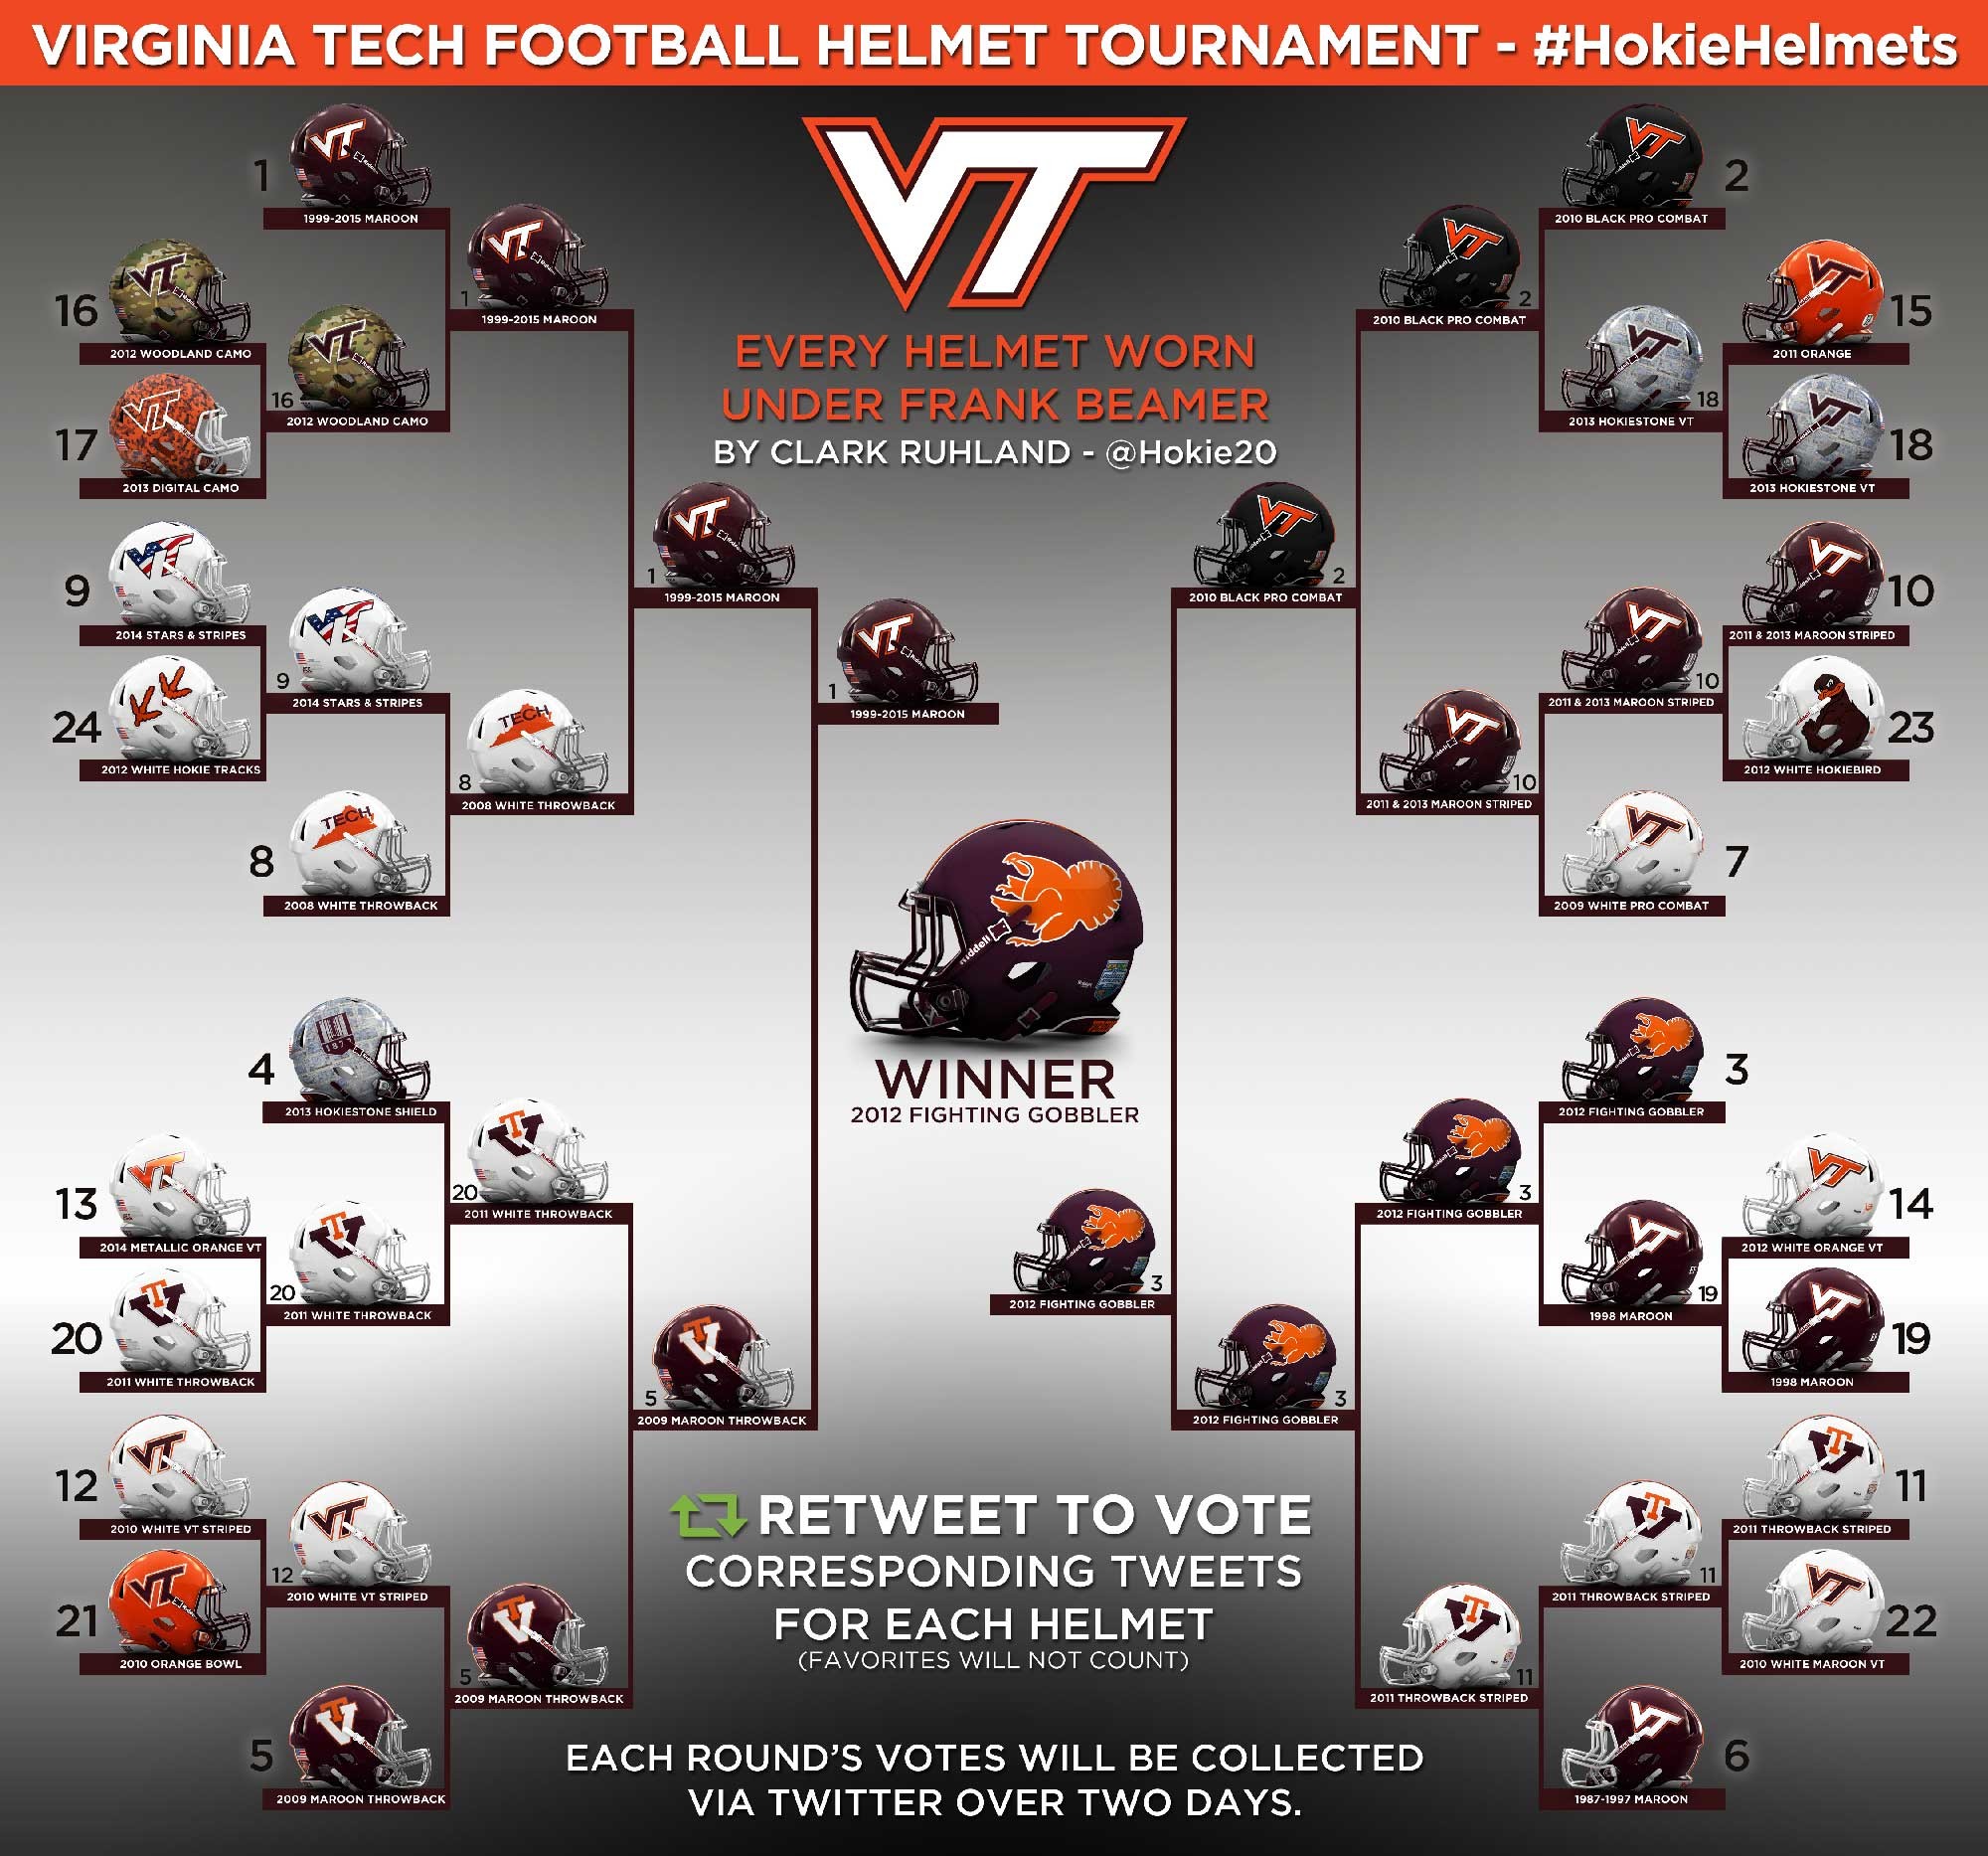 2000x1867 Check out the results of the Hokie Helmet Bracket from the Summer of 2015